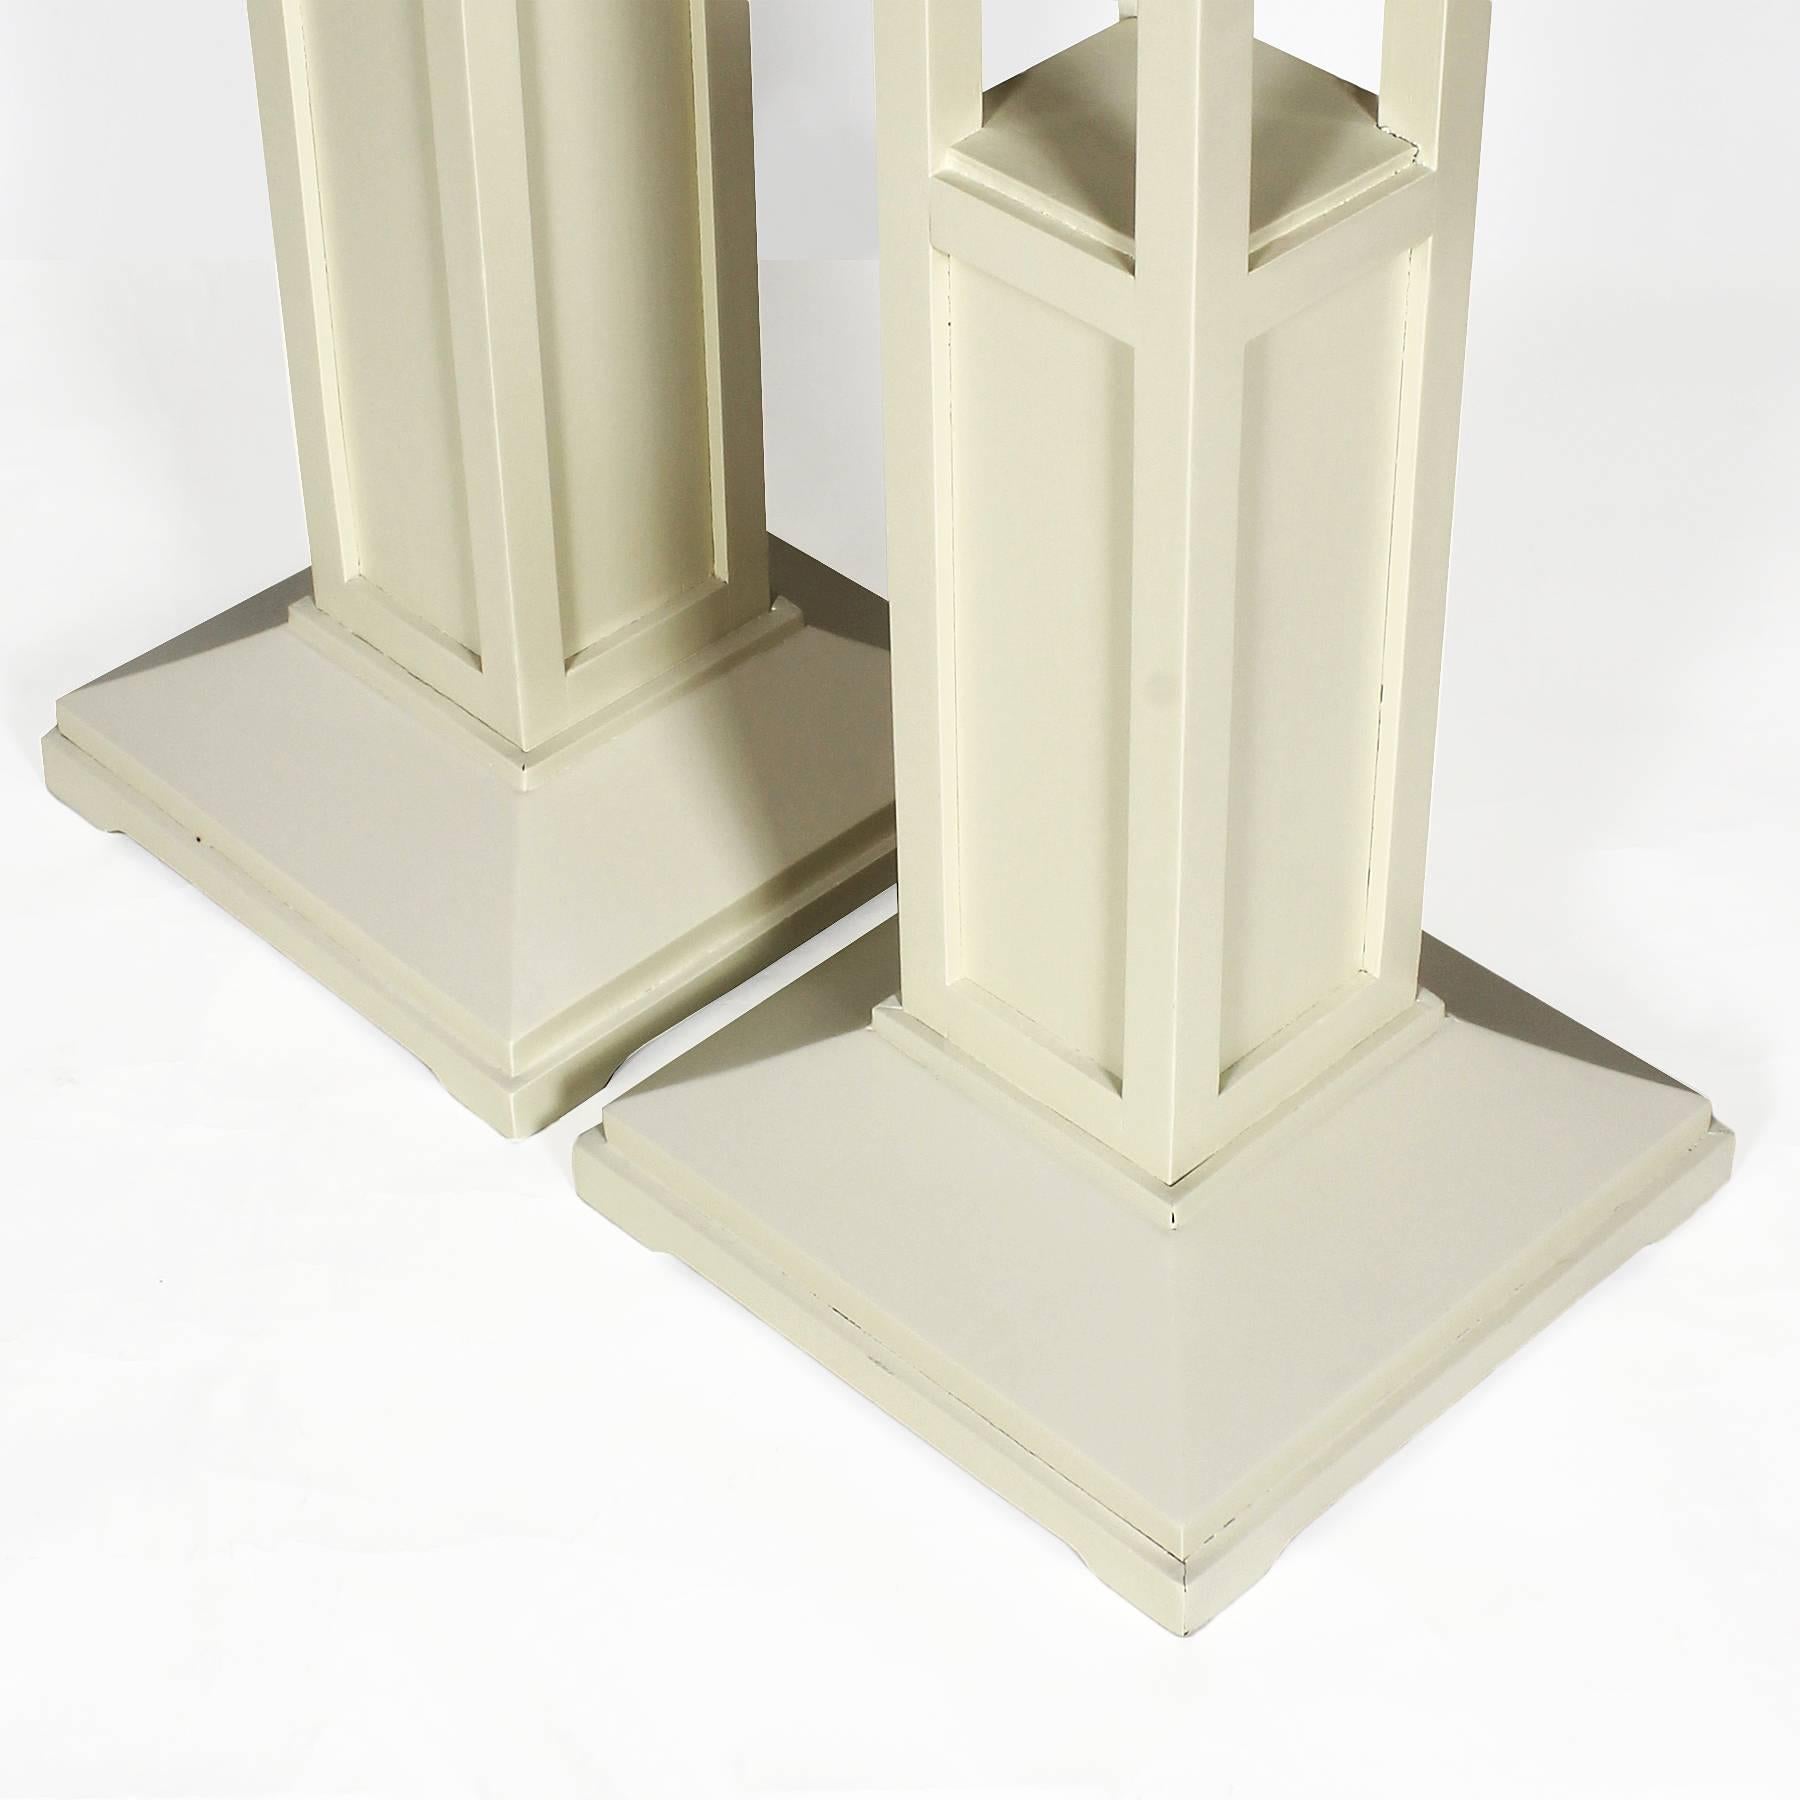 Early 20th Century 1910s Pair of Cubist Art Nouveau Stands, Ivory lacquered Oak - France For Sale